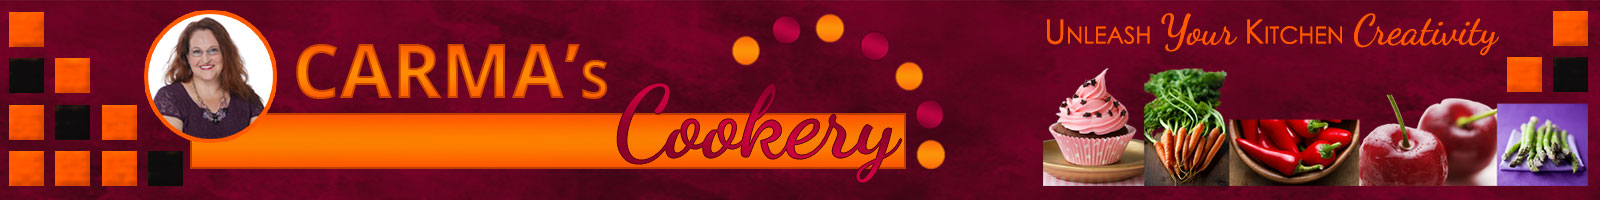 Carma's Cookery banner